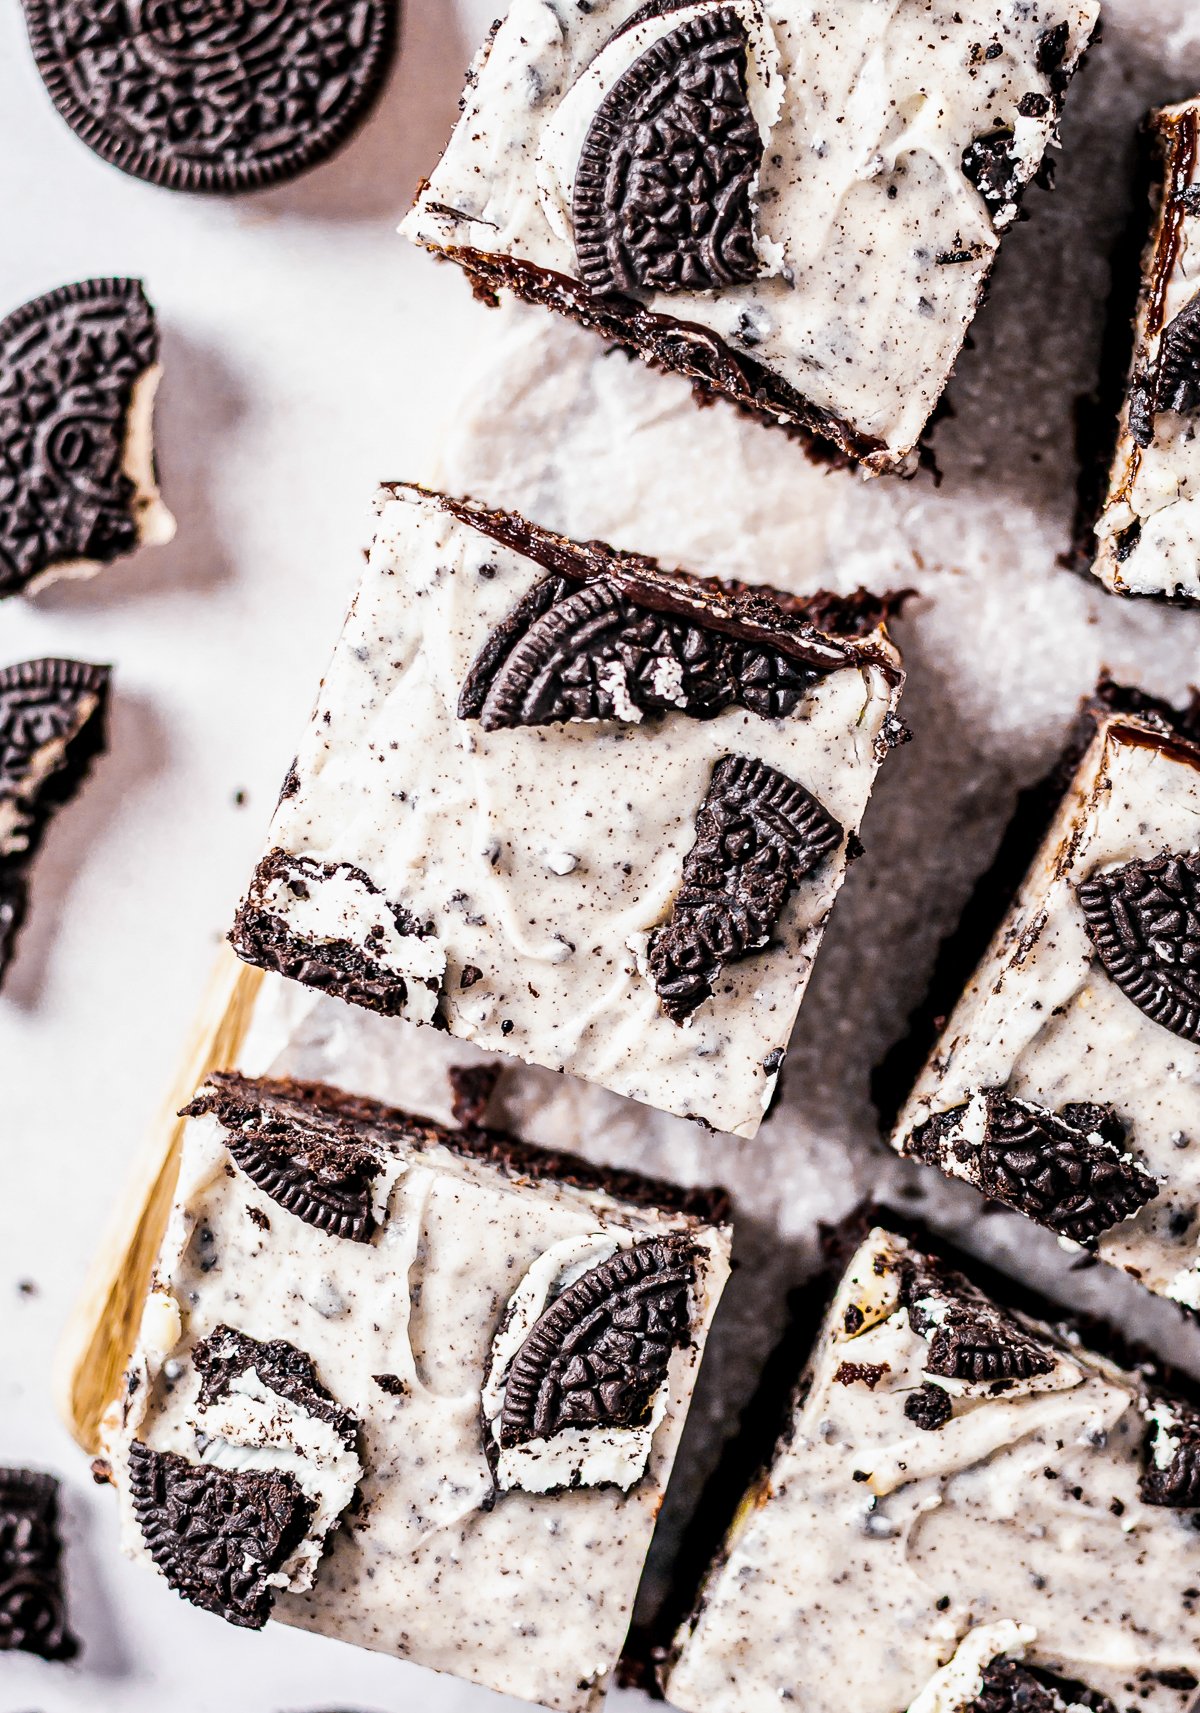 Overhead of cut brownies on wooden board showing Oreos on top.